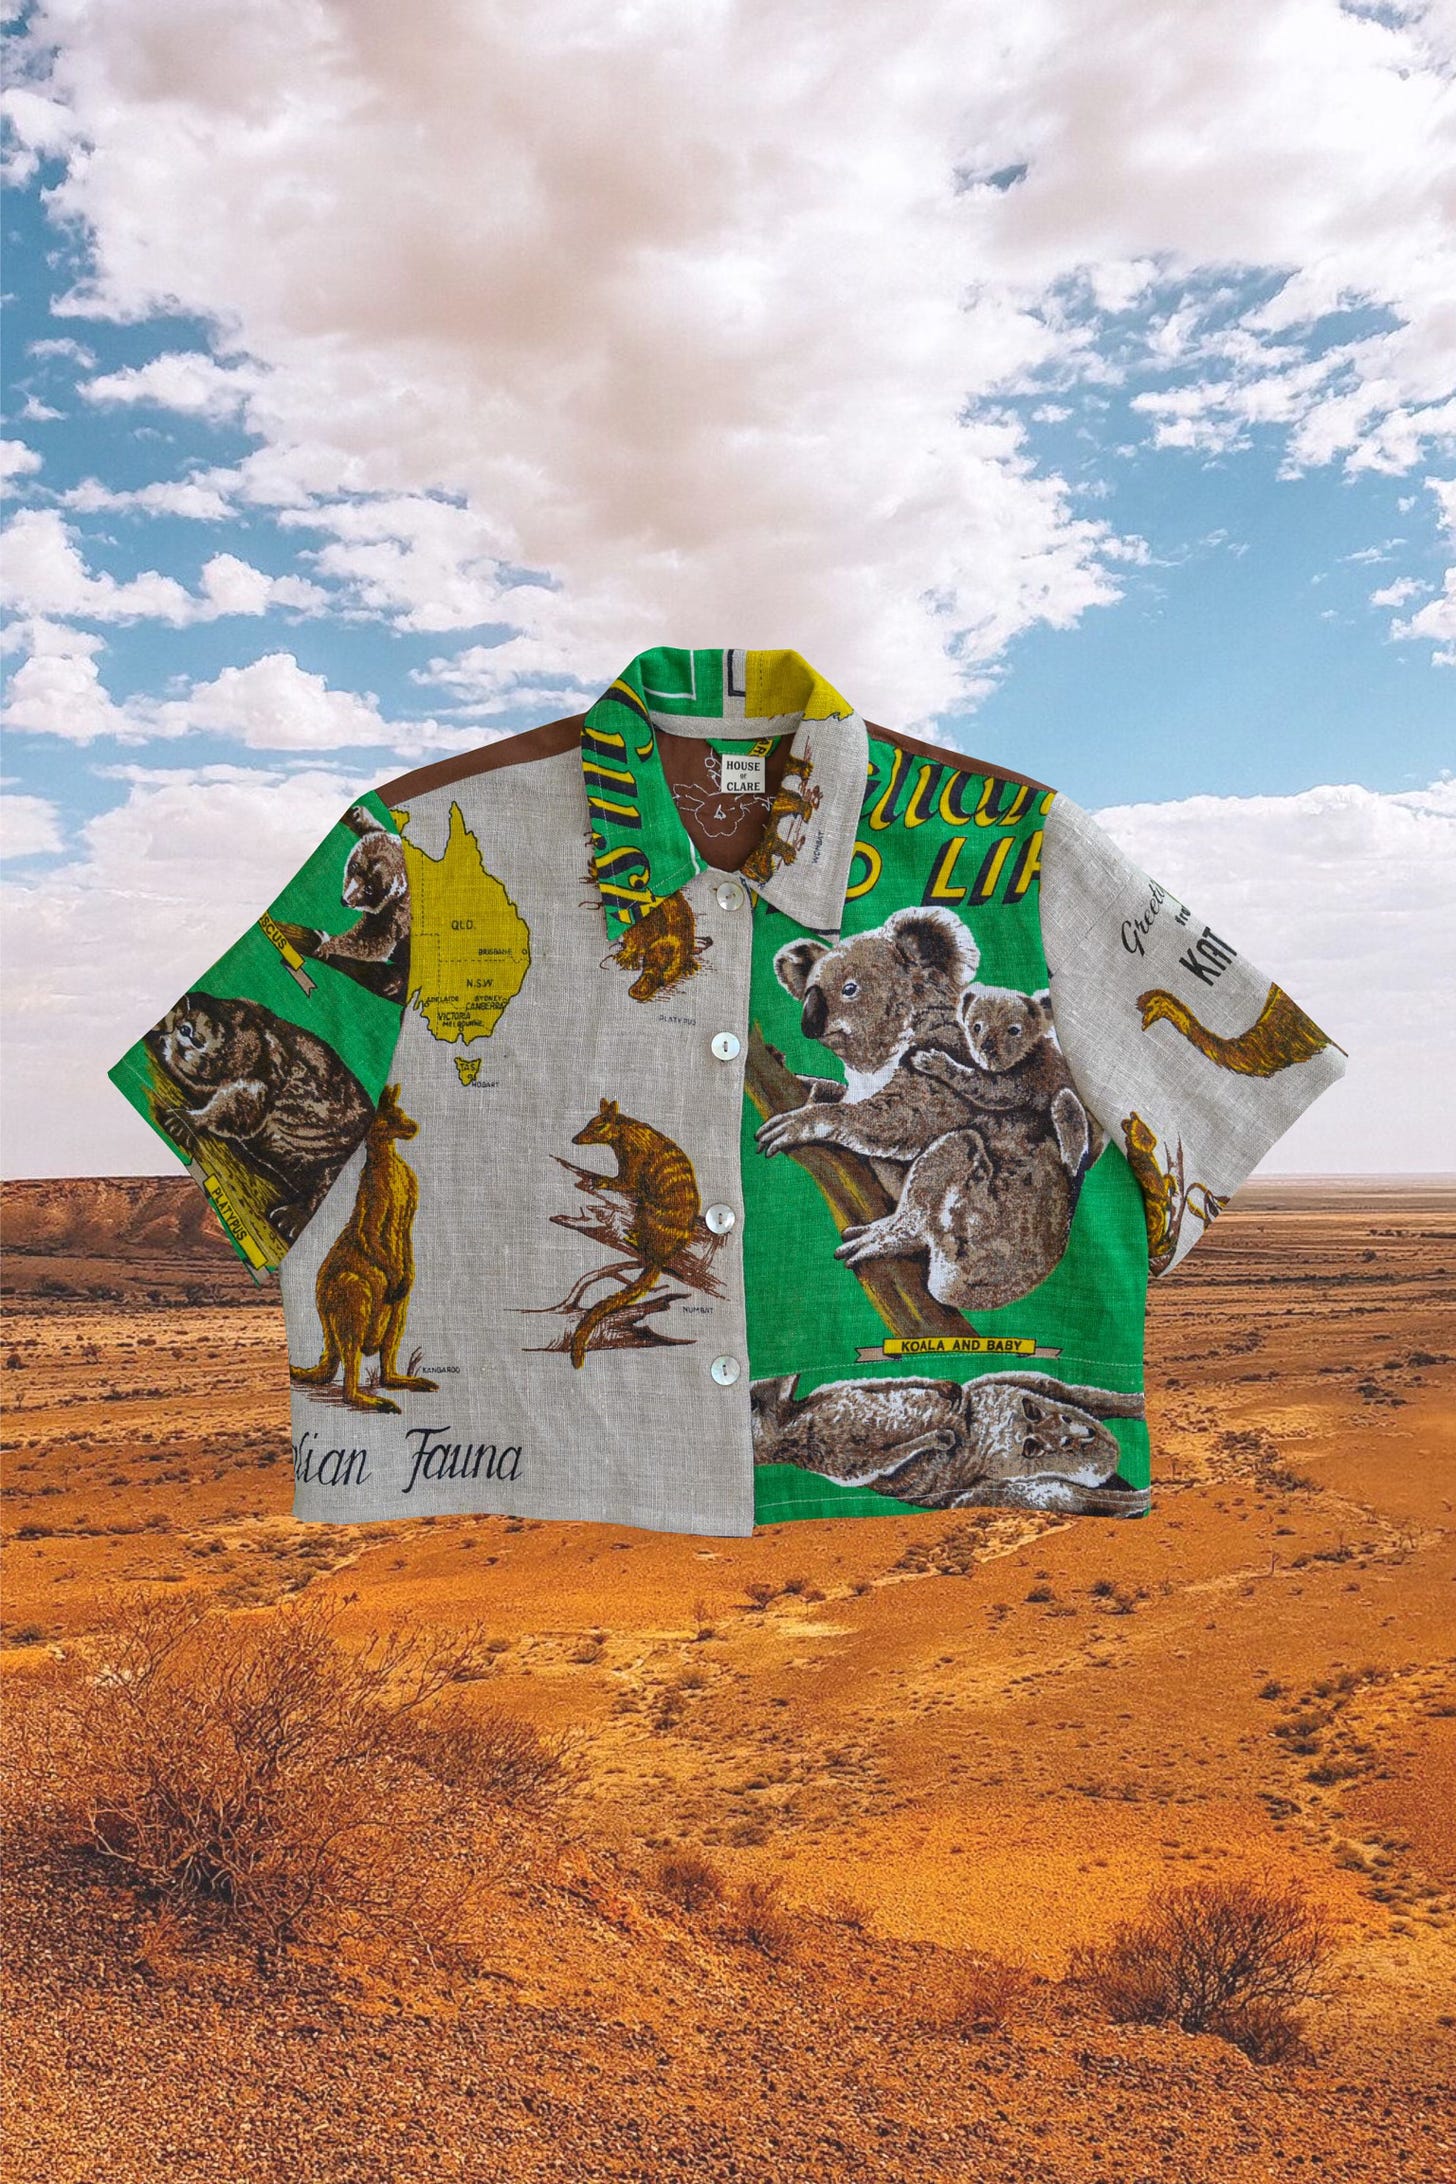 A photo of a Button up shirt made by House Of Clare with the fabric being the theme of Australian animals like a koala and kangaroo